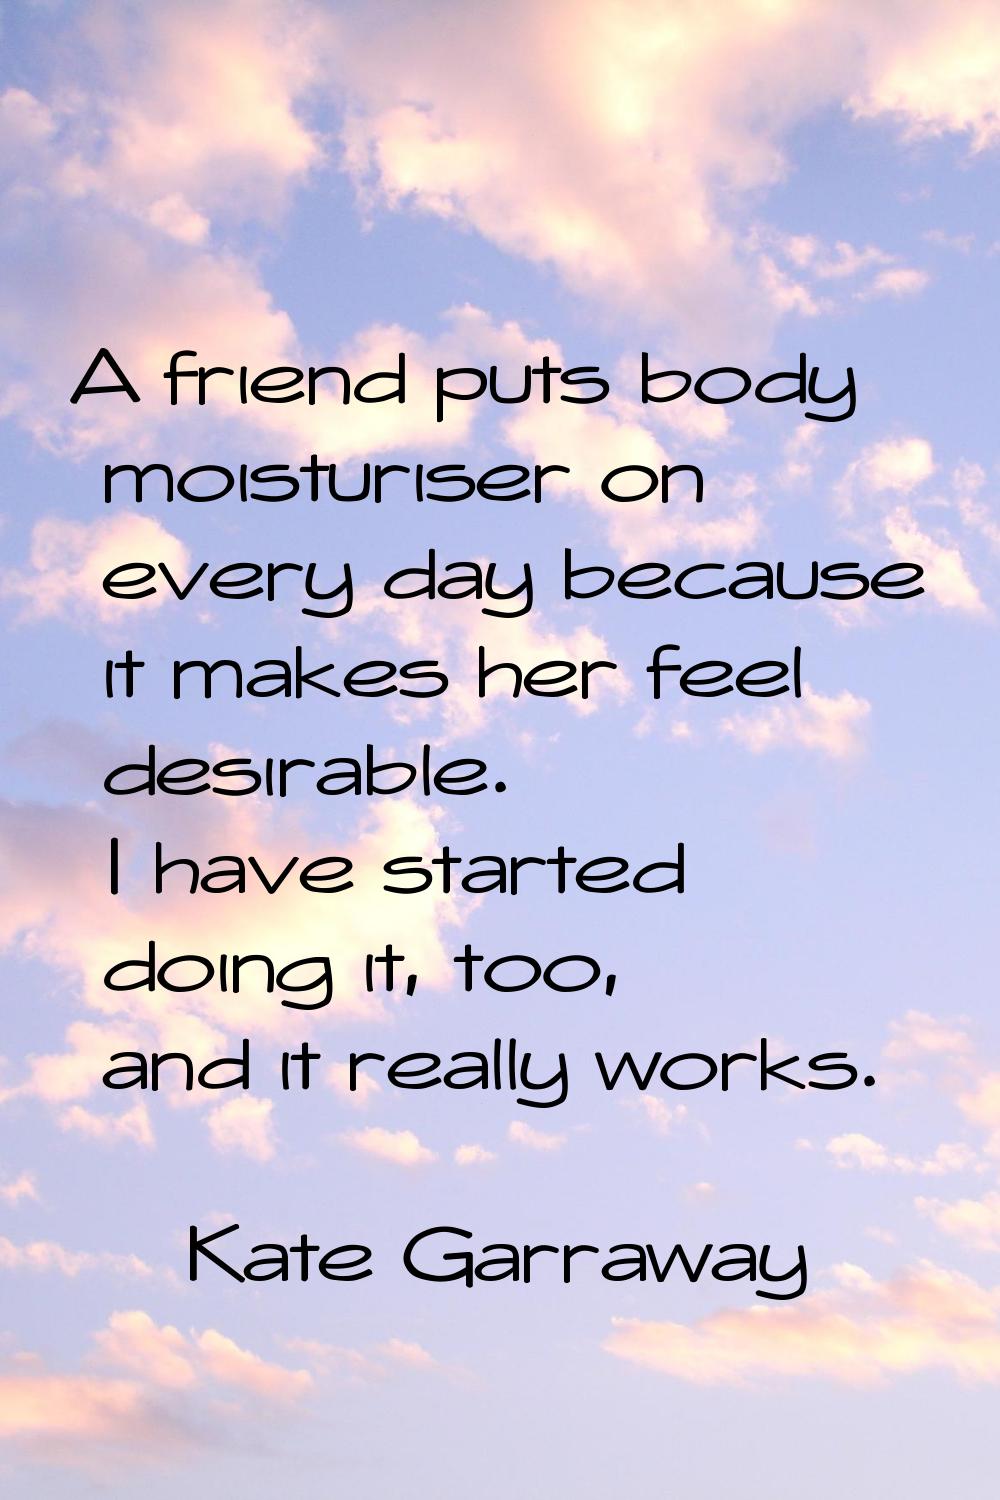 A friend puts body moisturiser on every day because it makes her feel desirable. I have started doi